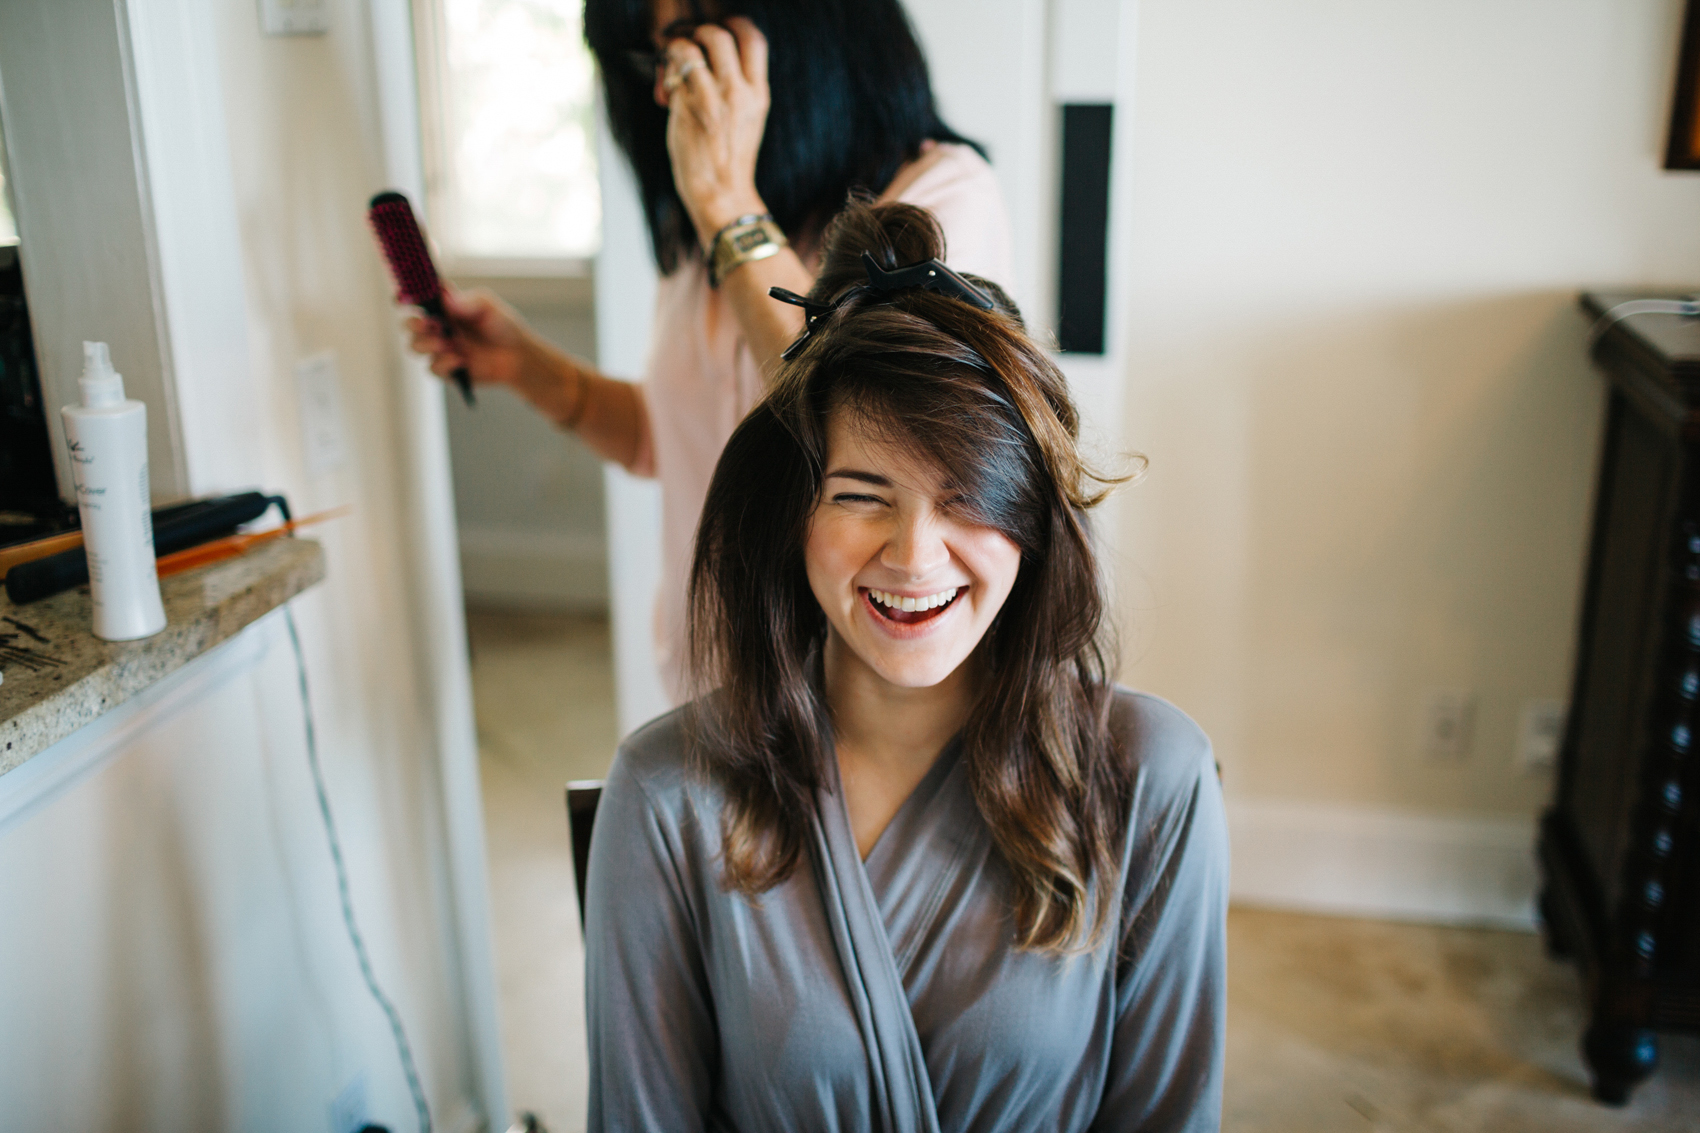 bridesmaid wearing a light grey robe while getting ready before the wedding